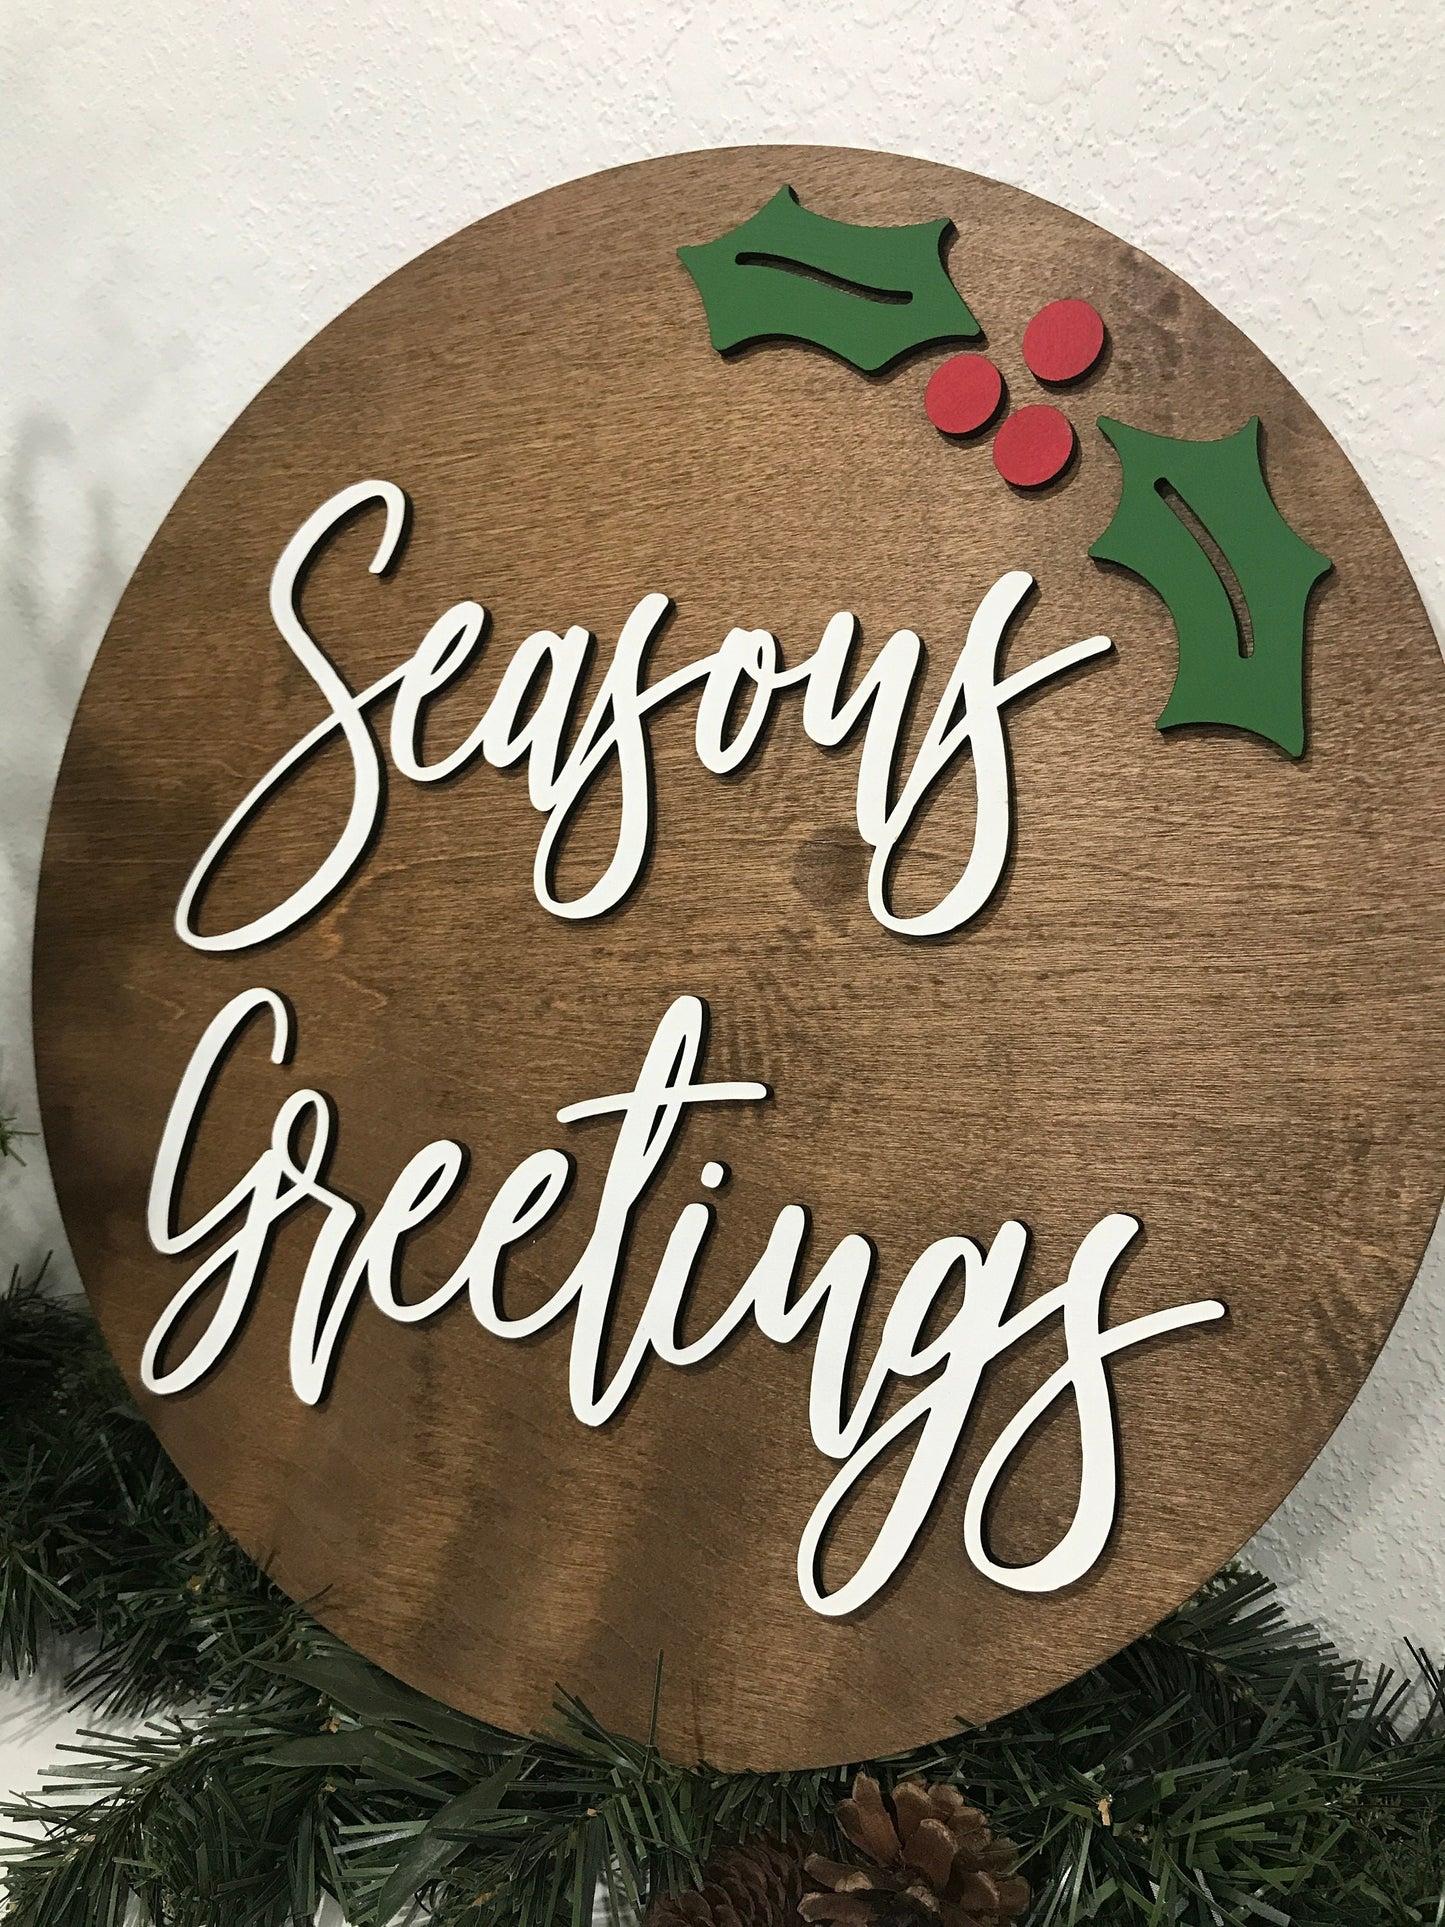 Seasons greetings sign, Christmas decorations, 3D holiday decor, porch wood signs, living room wooden sign wall hanging, holly mantel decor